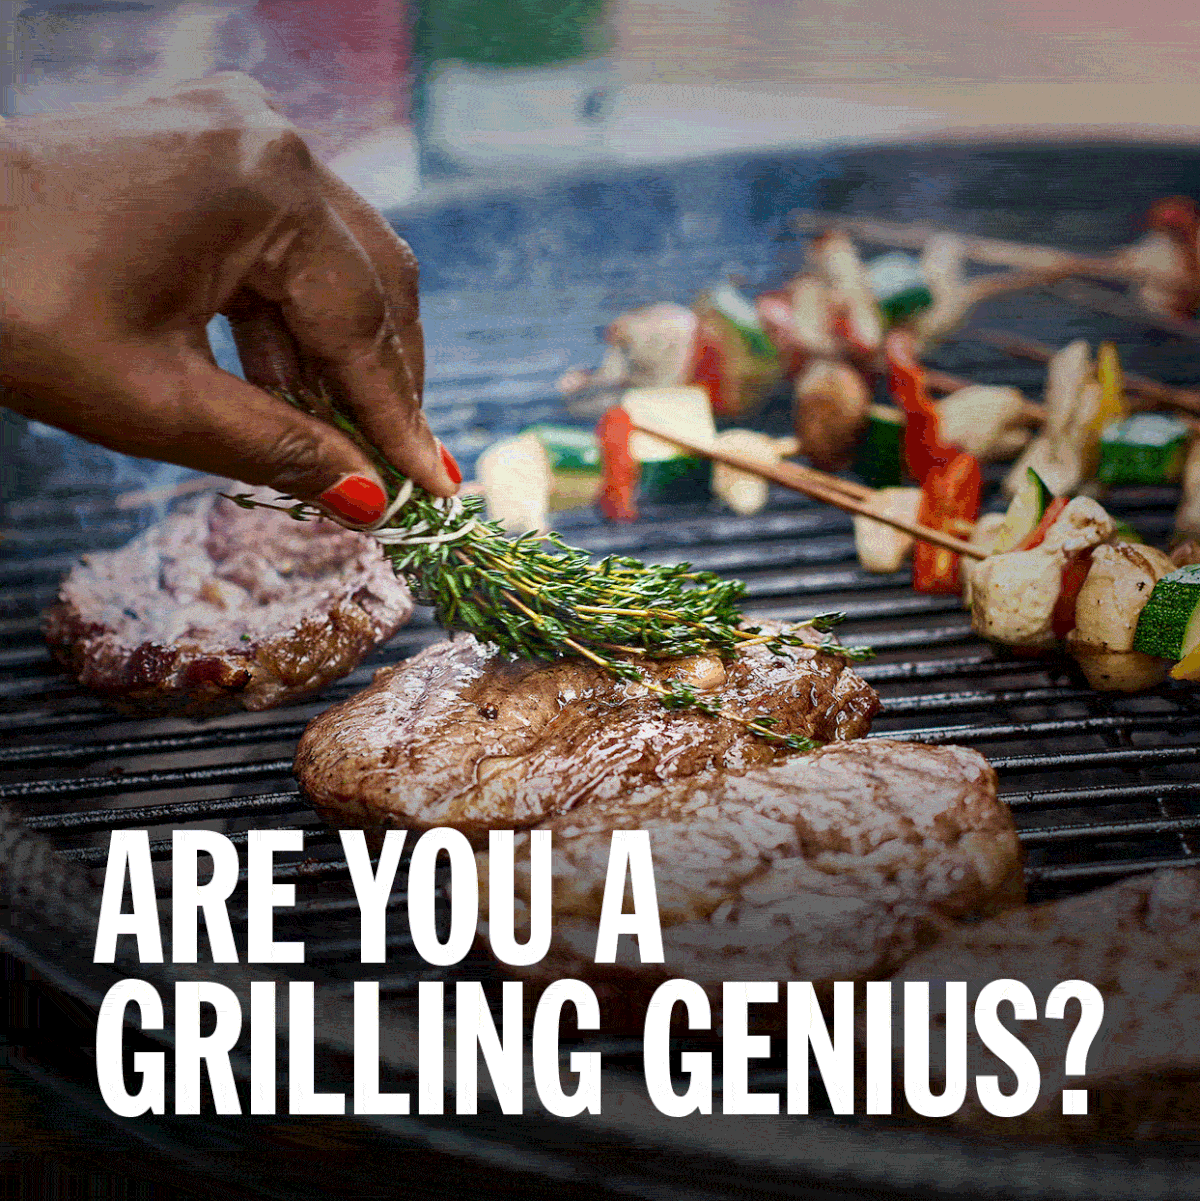 Woman's hand garnishing meat on a grill